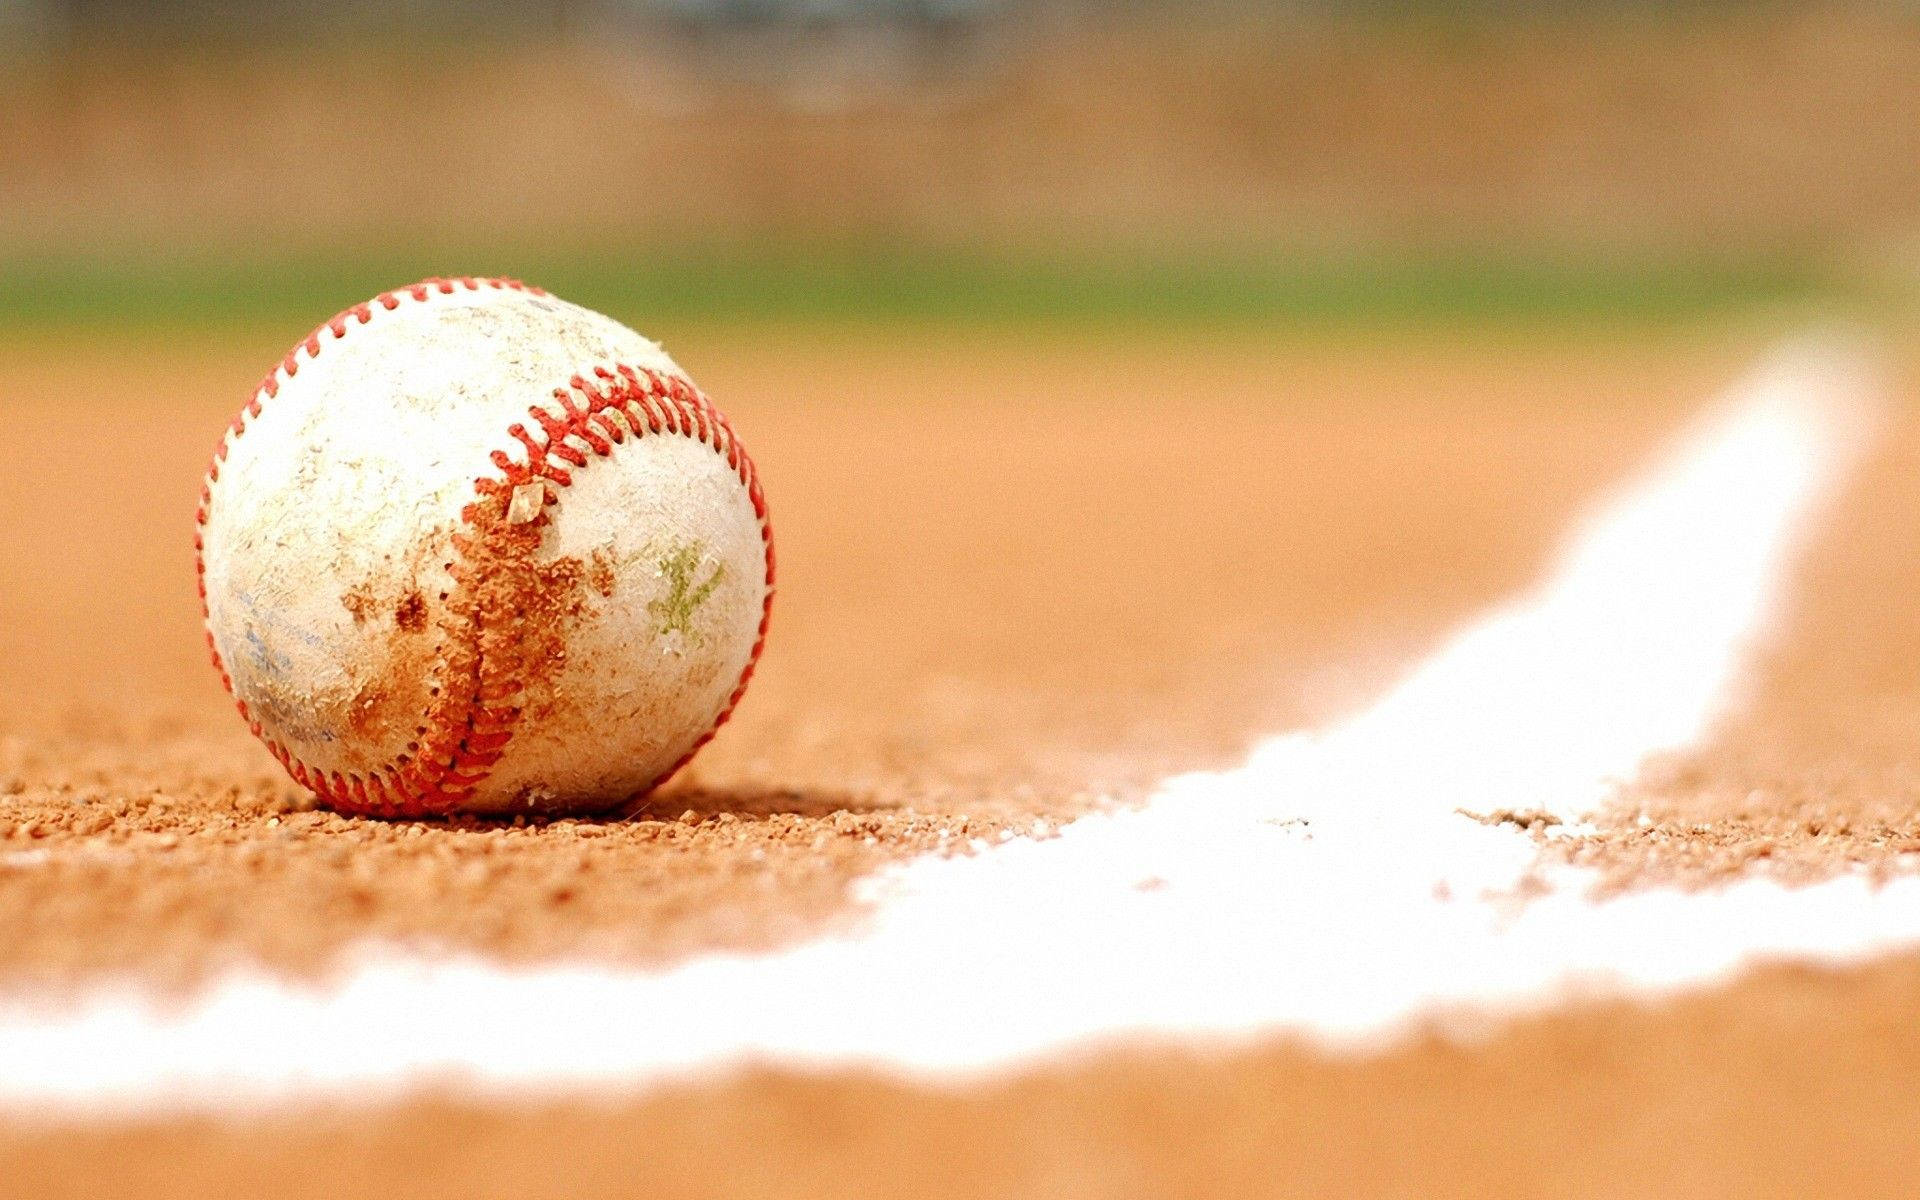 Awesome Softball In White Close-up Wallpaper